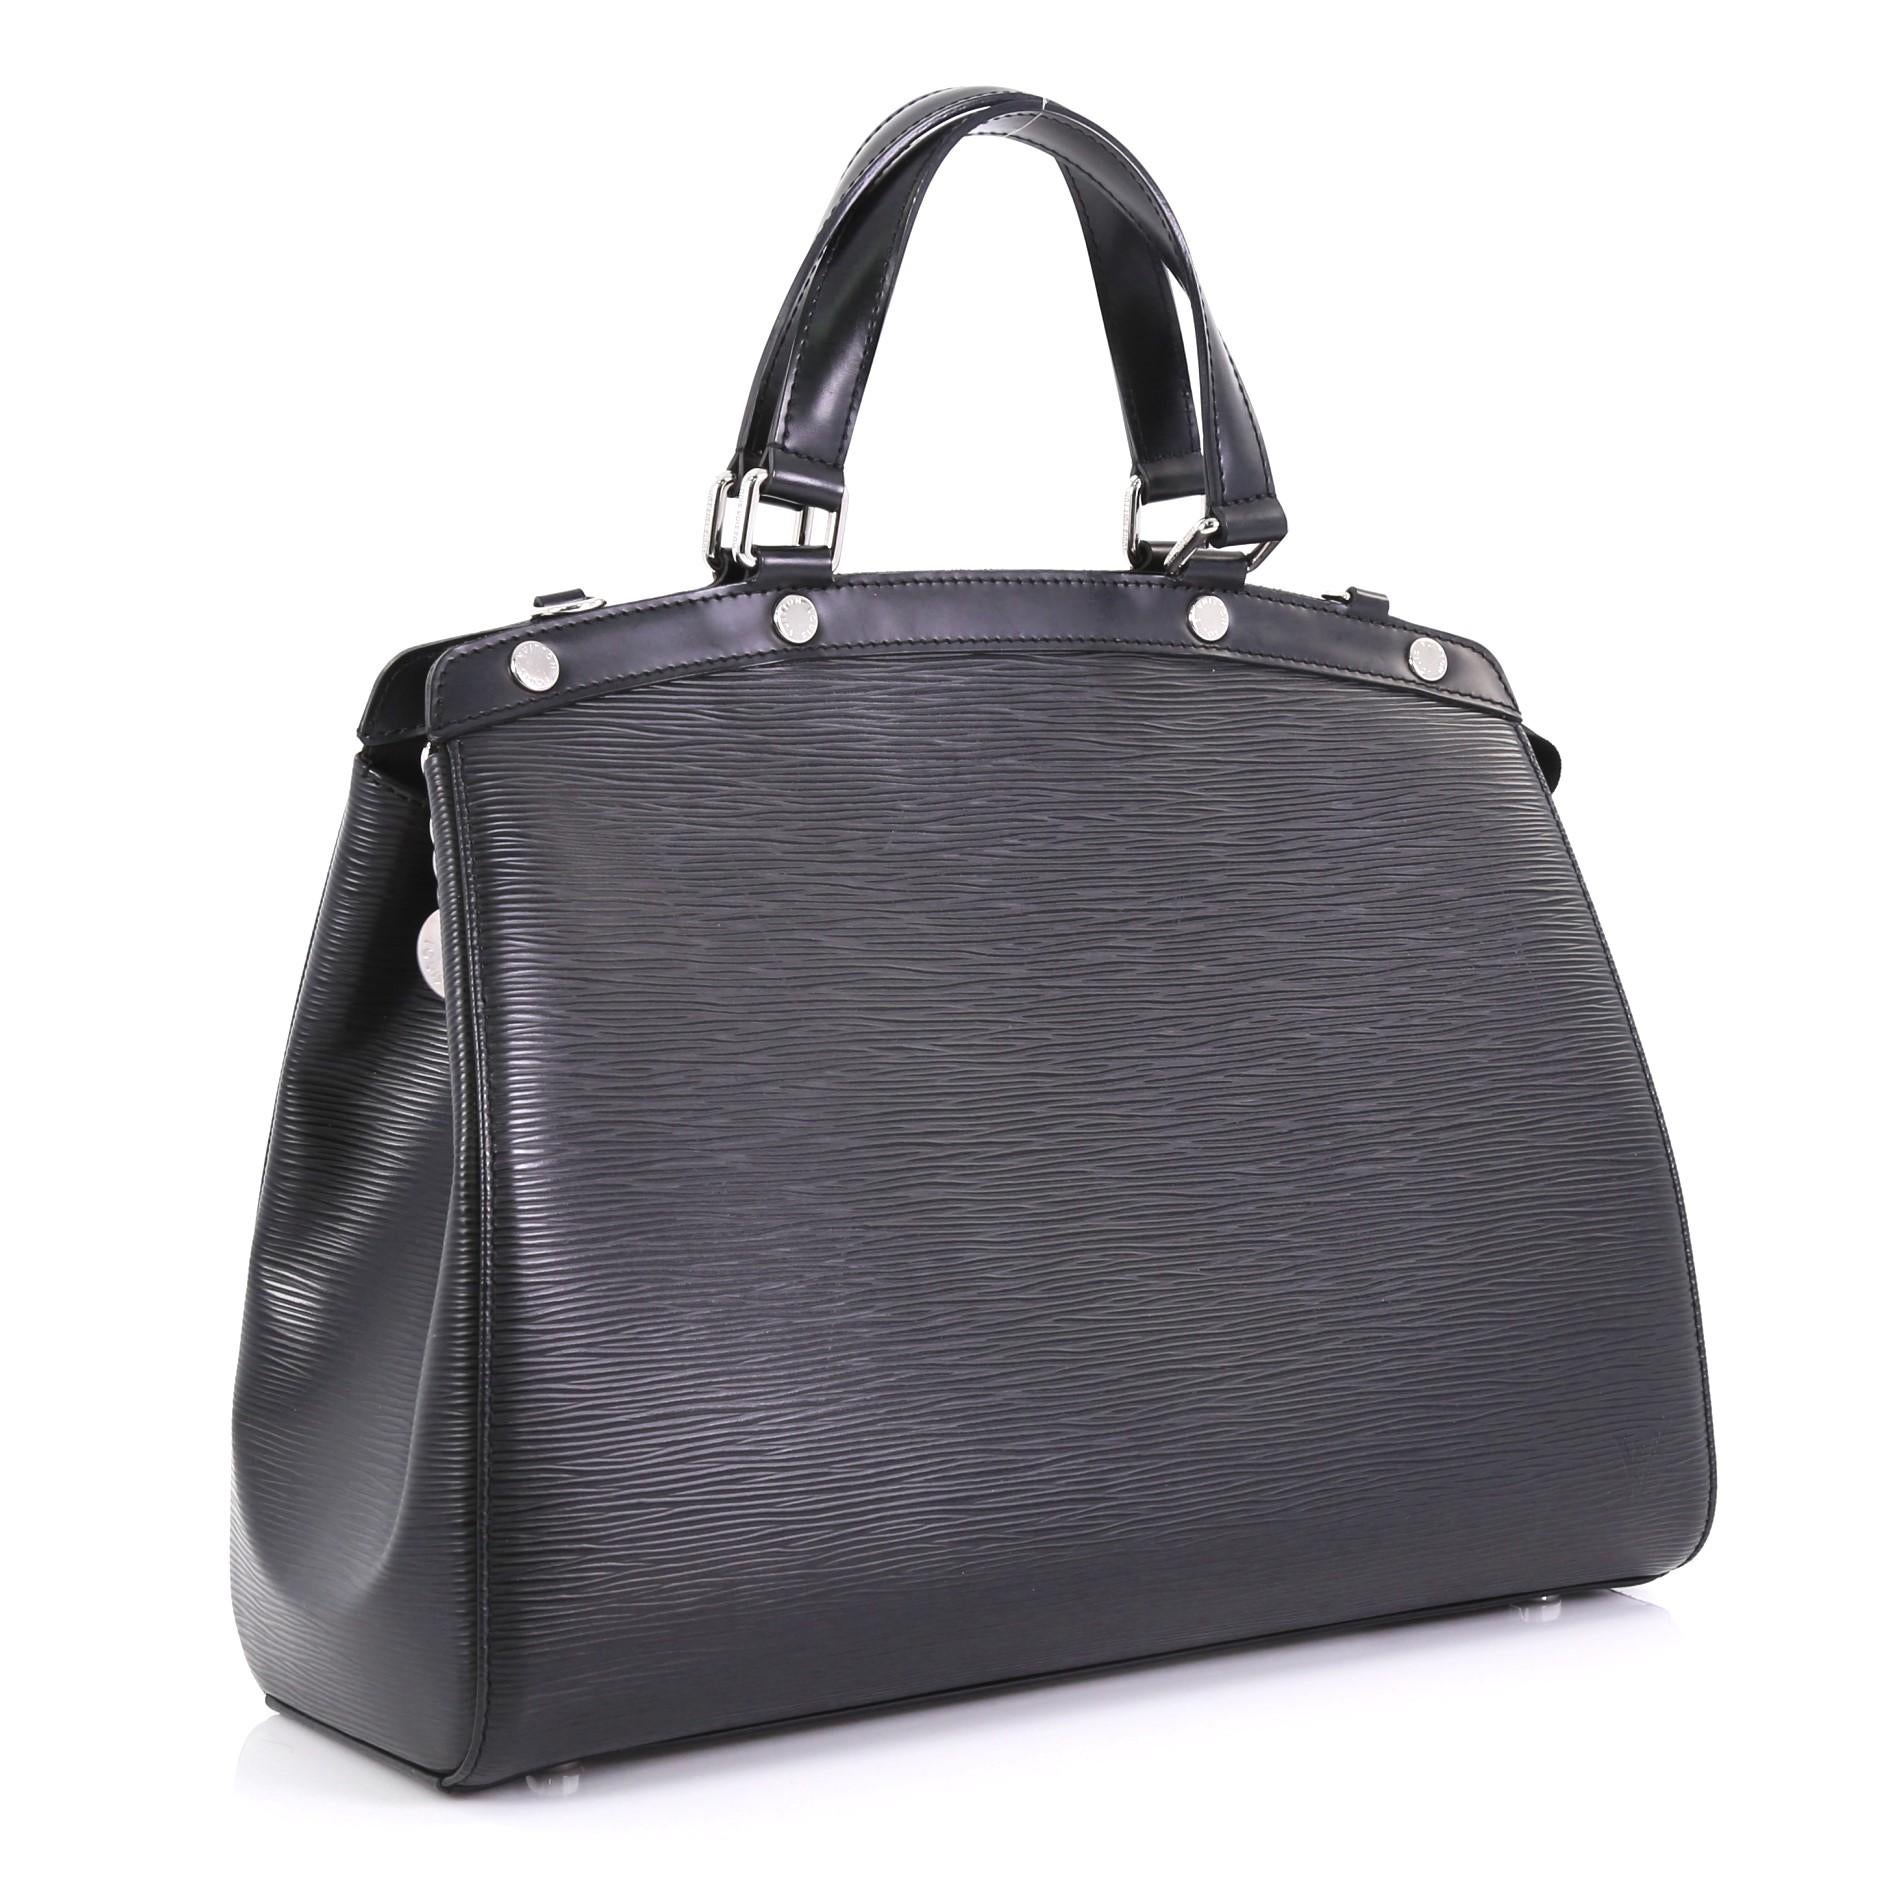 This Louis Vuitton Brea Handbag Epi Leather GM, crafted from black epi leather, features dual flat leather handles, engraved LV studs, subtle LV logo, protective base studs, and silver-tone hardware. Its zip closure opens to a black fabric interior